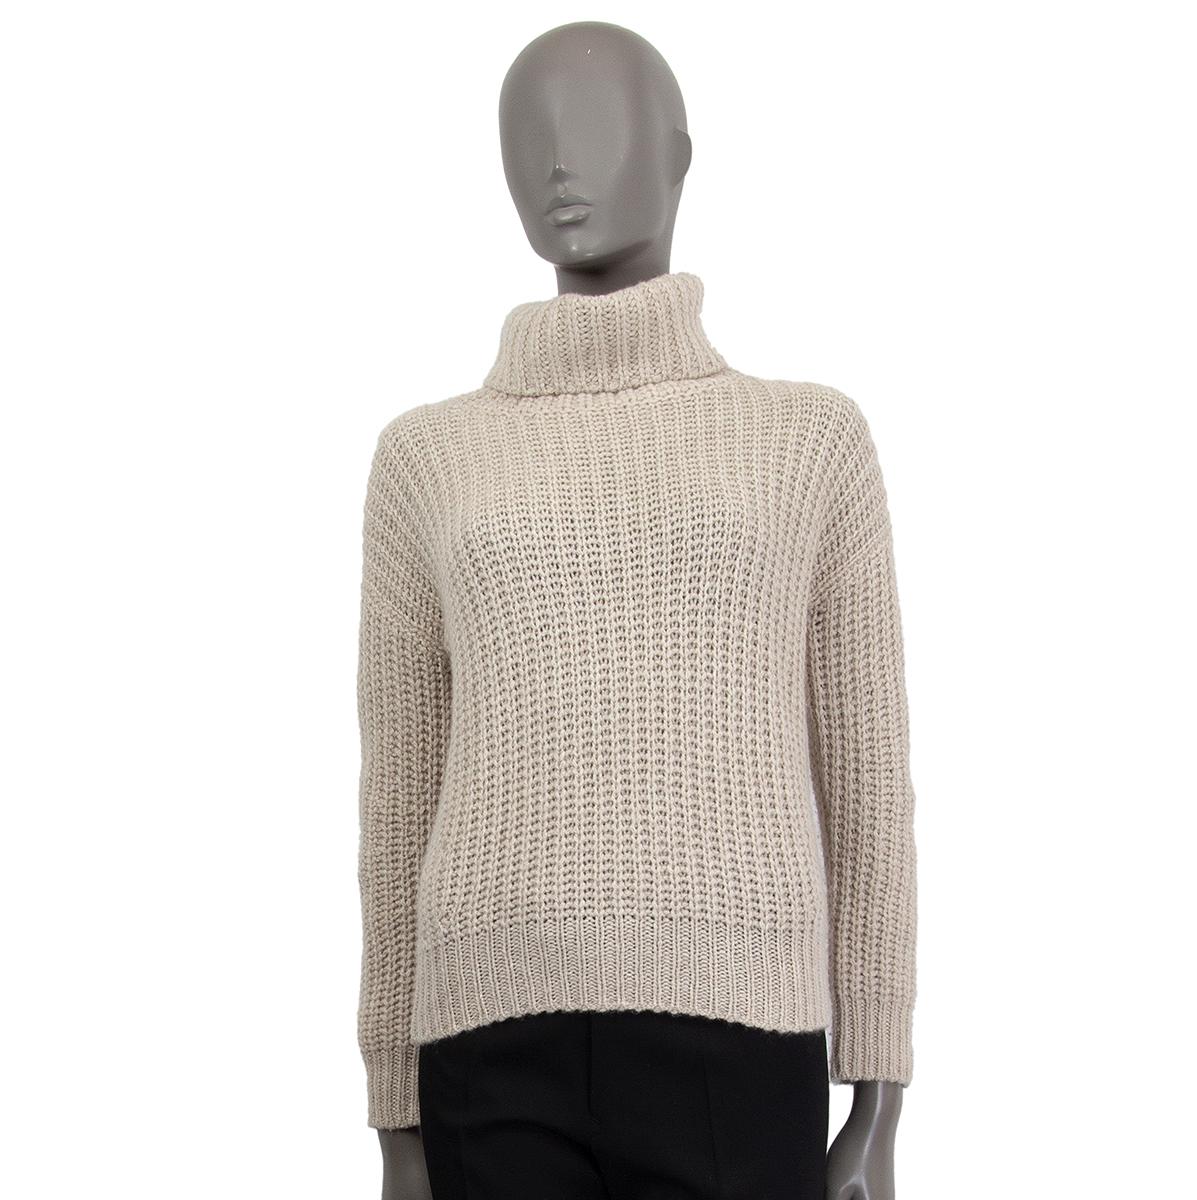 Loro Piana chunky turtleneck sweater in off-white cashmere (100%) with drop shoulders. Sleeve measurement taken from neck. Has been worn with some slightly pulled threads and some pilling. Overall in very good condition.

Tag Size 38
Size XS
Bust